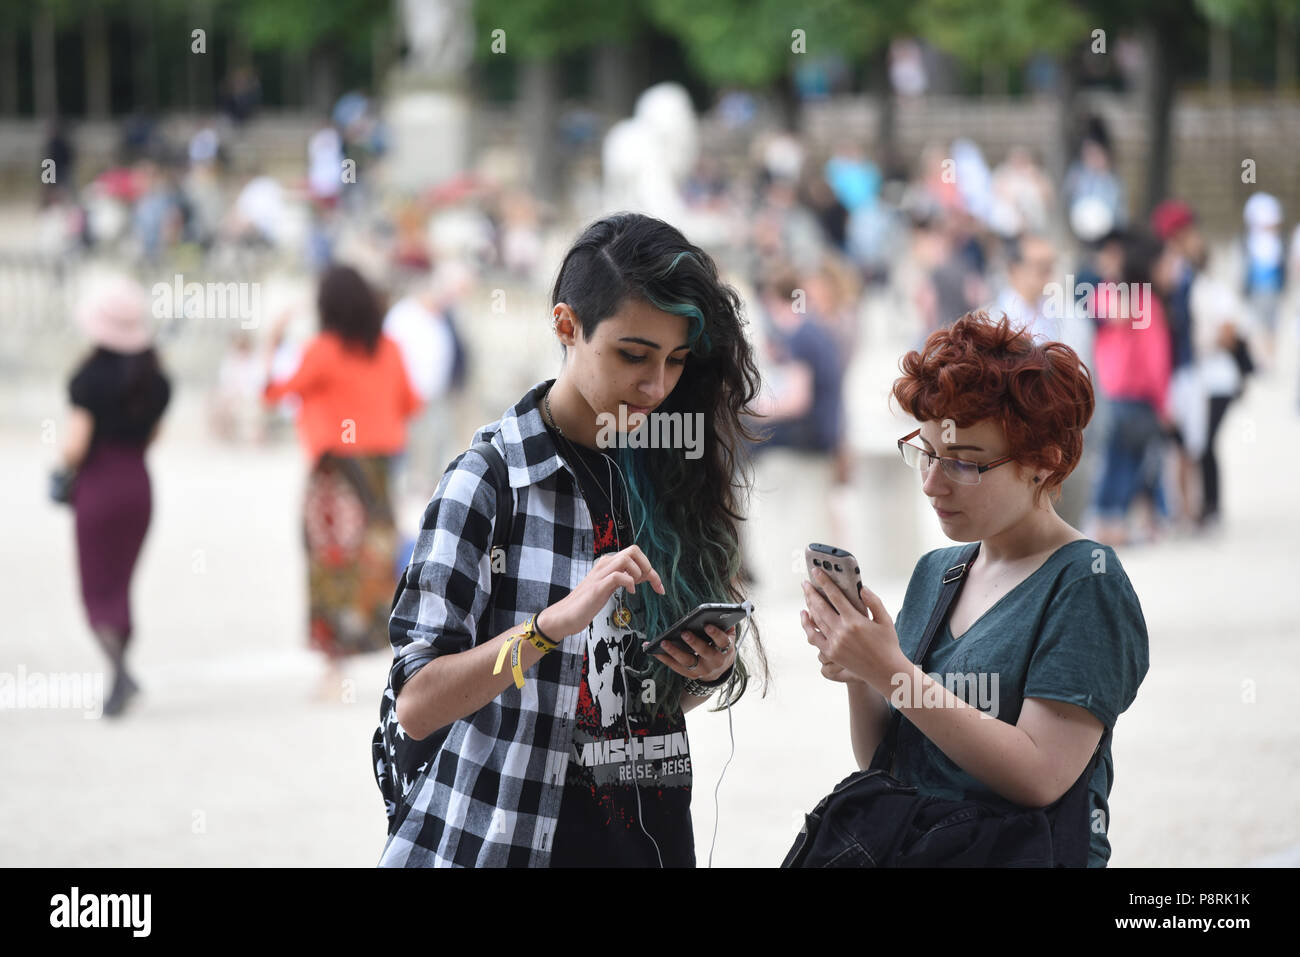 July 14, 2016 - Paris, France: French arts students Calypso (L), 17 yo, and Lorenz, 18yo, take part in a mass Pokemon hunt in the Luxembourg Garden in central Paris. Hundreds of players of the new Pokemon Go game showed up to take part in a massive hunt despite the authorities' attempt to cancel the event. Despite playing mostly solo, the Pokemon Go users enjoyed to interact and meet other players. Millions of users have already downloaded the game, which requires users to catch on-screen pokemon characters using their real-world location. *** FRANCE OUT / NO SALES TO FR Stock Photo